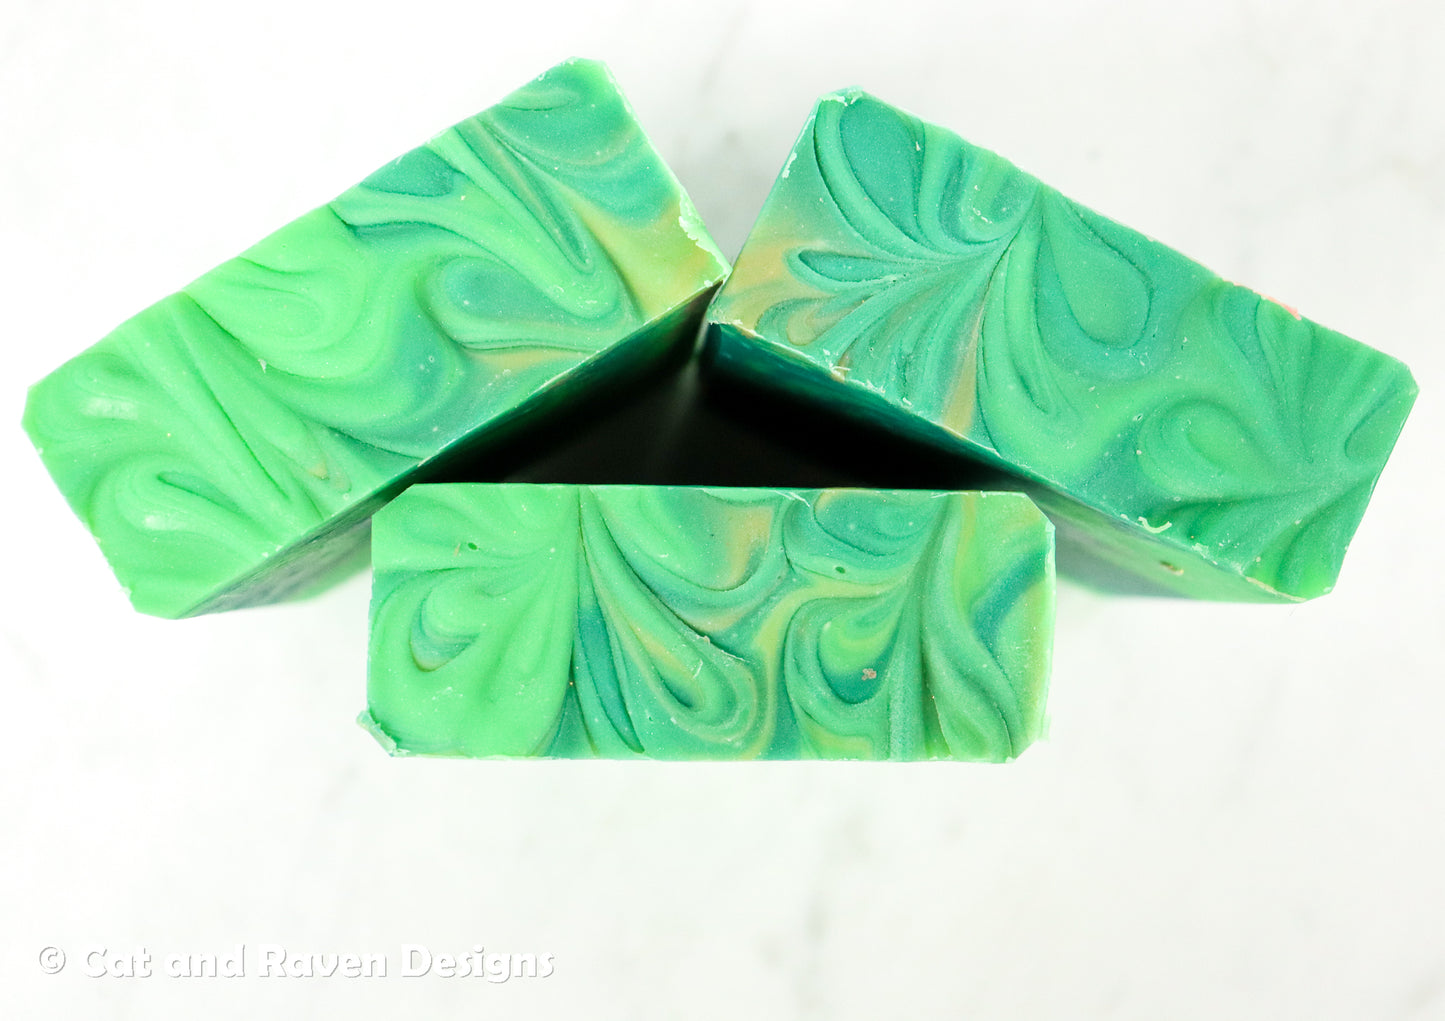 For the Aesthetic soap